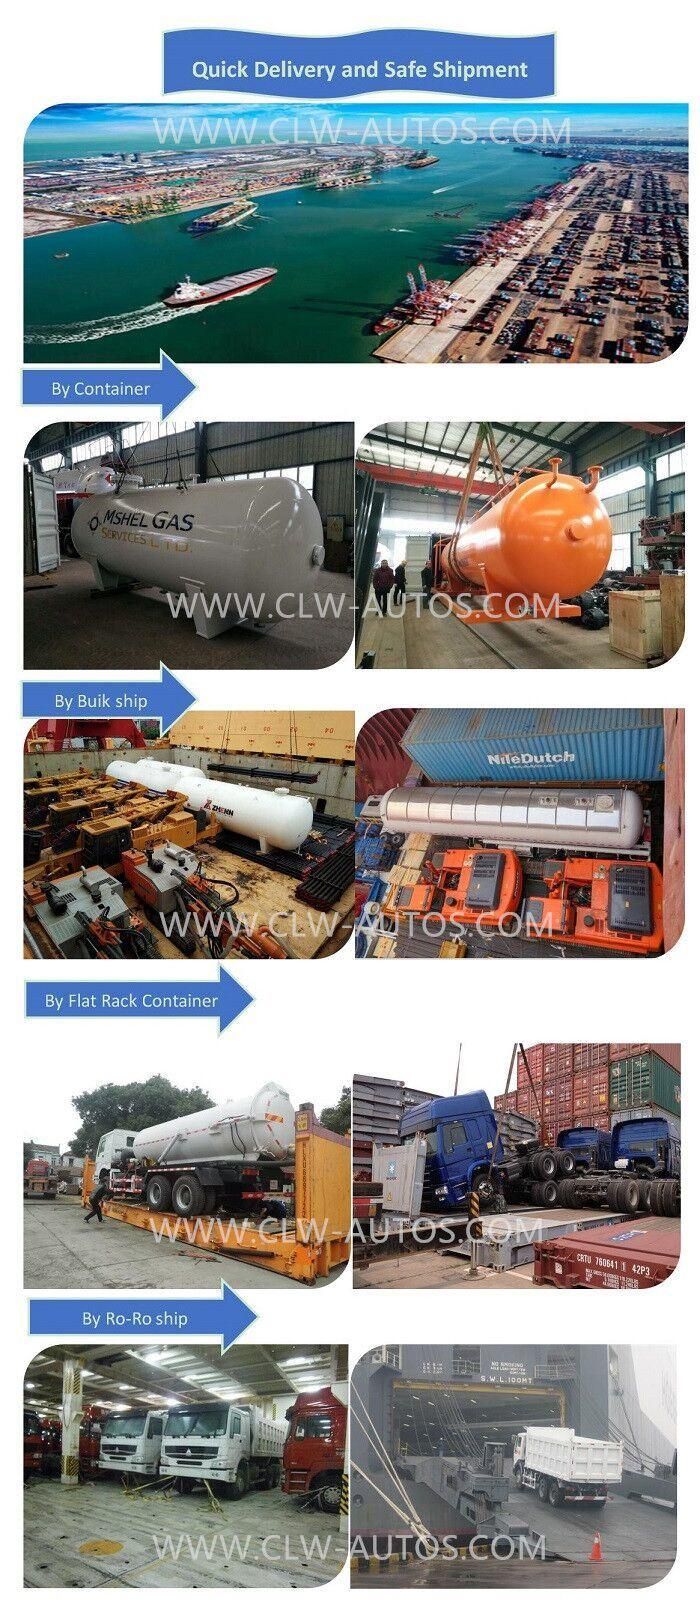 China Dongfeng 4*2 Sewage Vacuum Suction High Pressure Jetting Cleaning Truck 8, 000 Liters Sewage Suction Truck